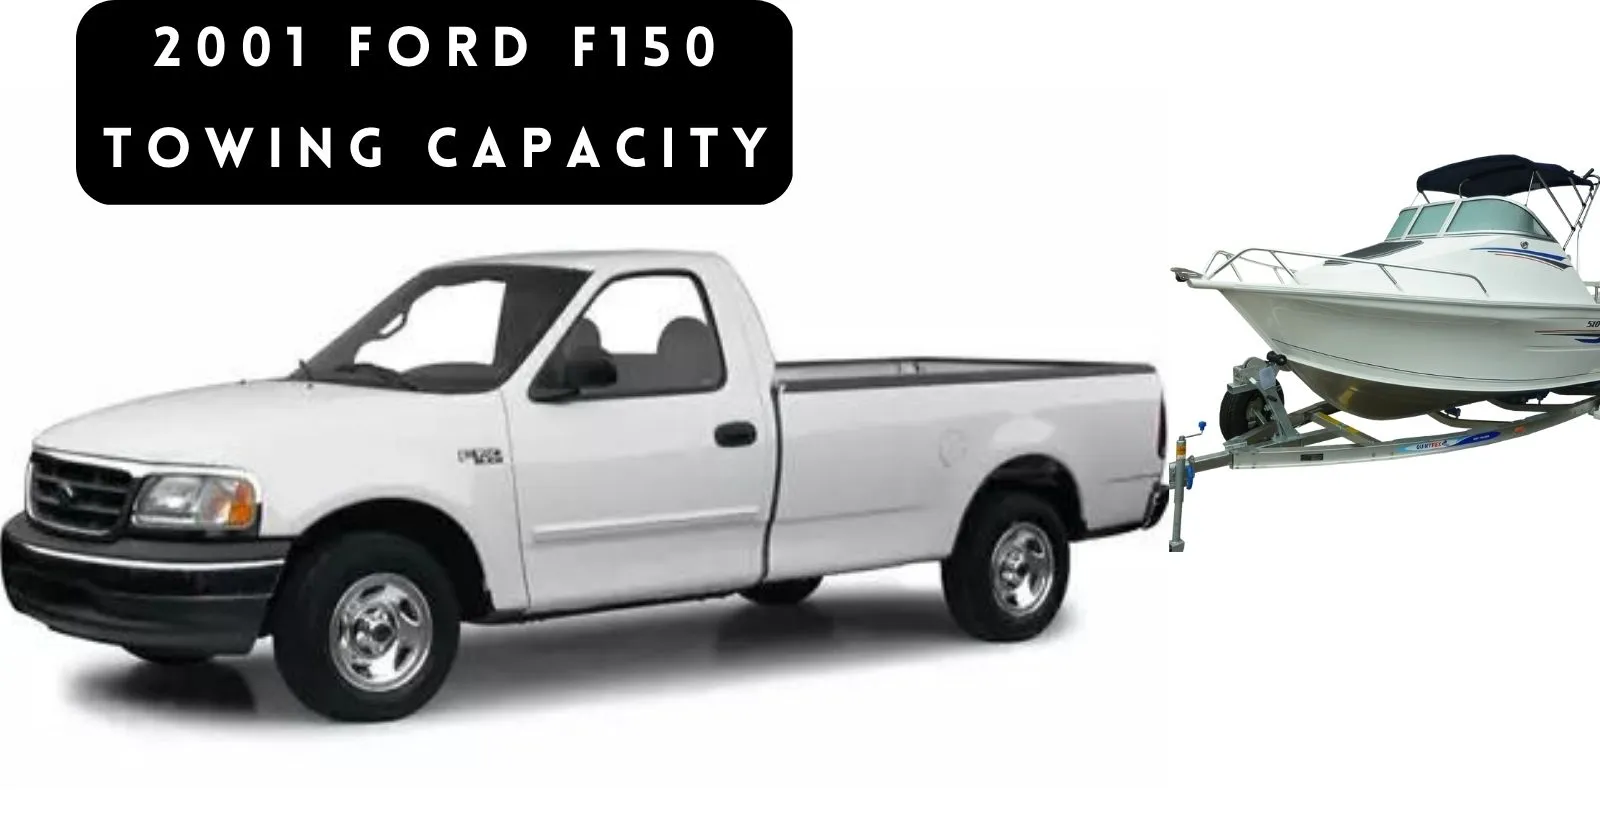 explore-2001-ford-f150-towing-capacity-with-chart-thecartowing